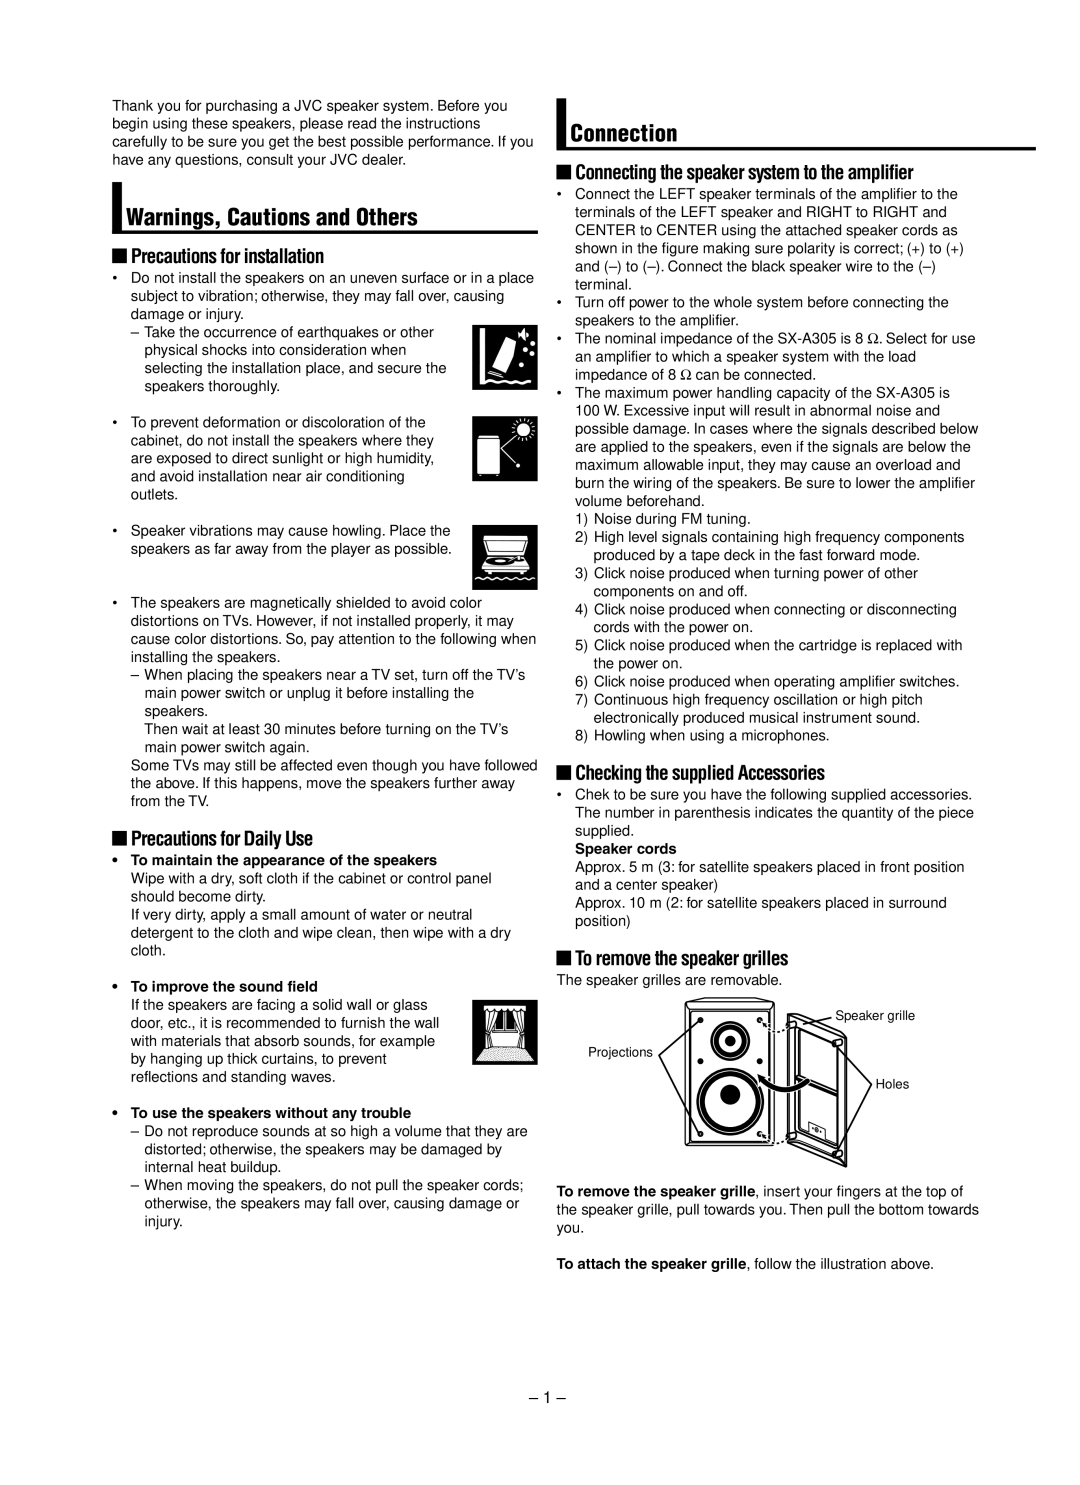 JVC SX-A305 manual Warnings, Cautions and Others, Connection, Precautions for installation, Precautions for Daily Use 